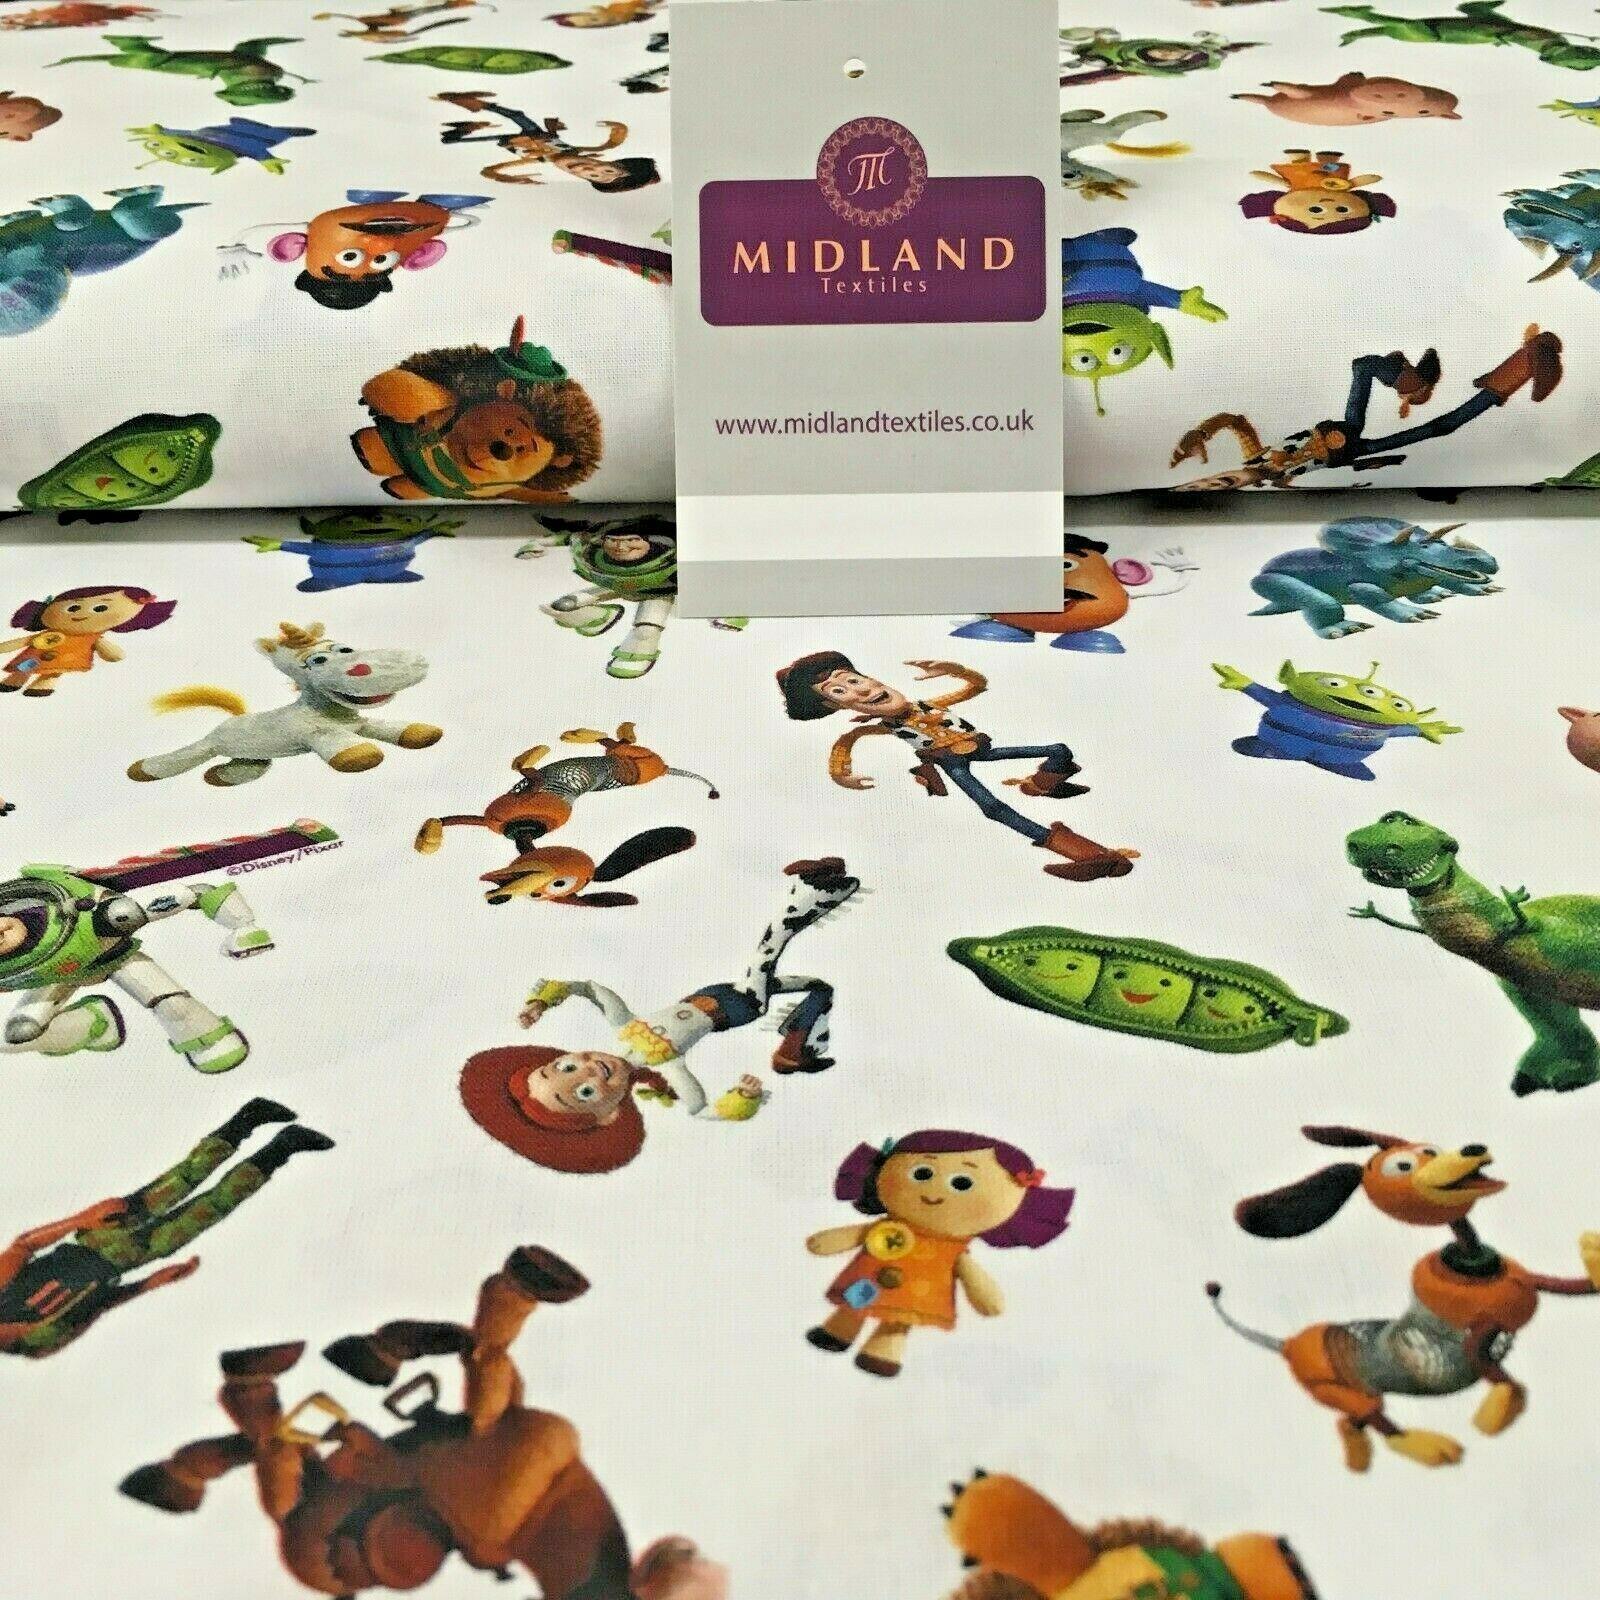 White Toy Story Licensed Digital Printed 100% Cotton Fabric 150 cm MH1191 Mtex